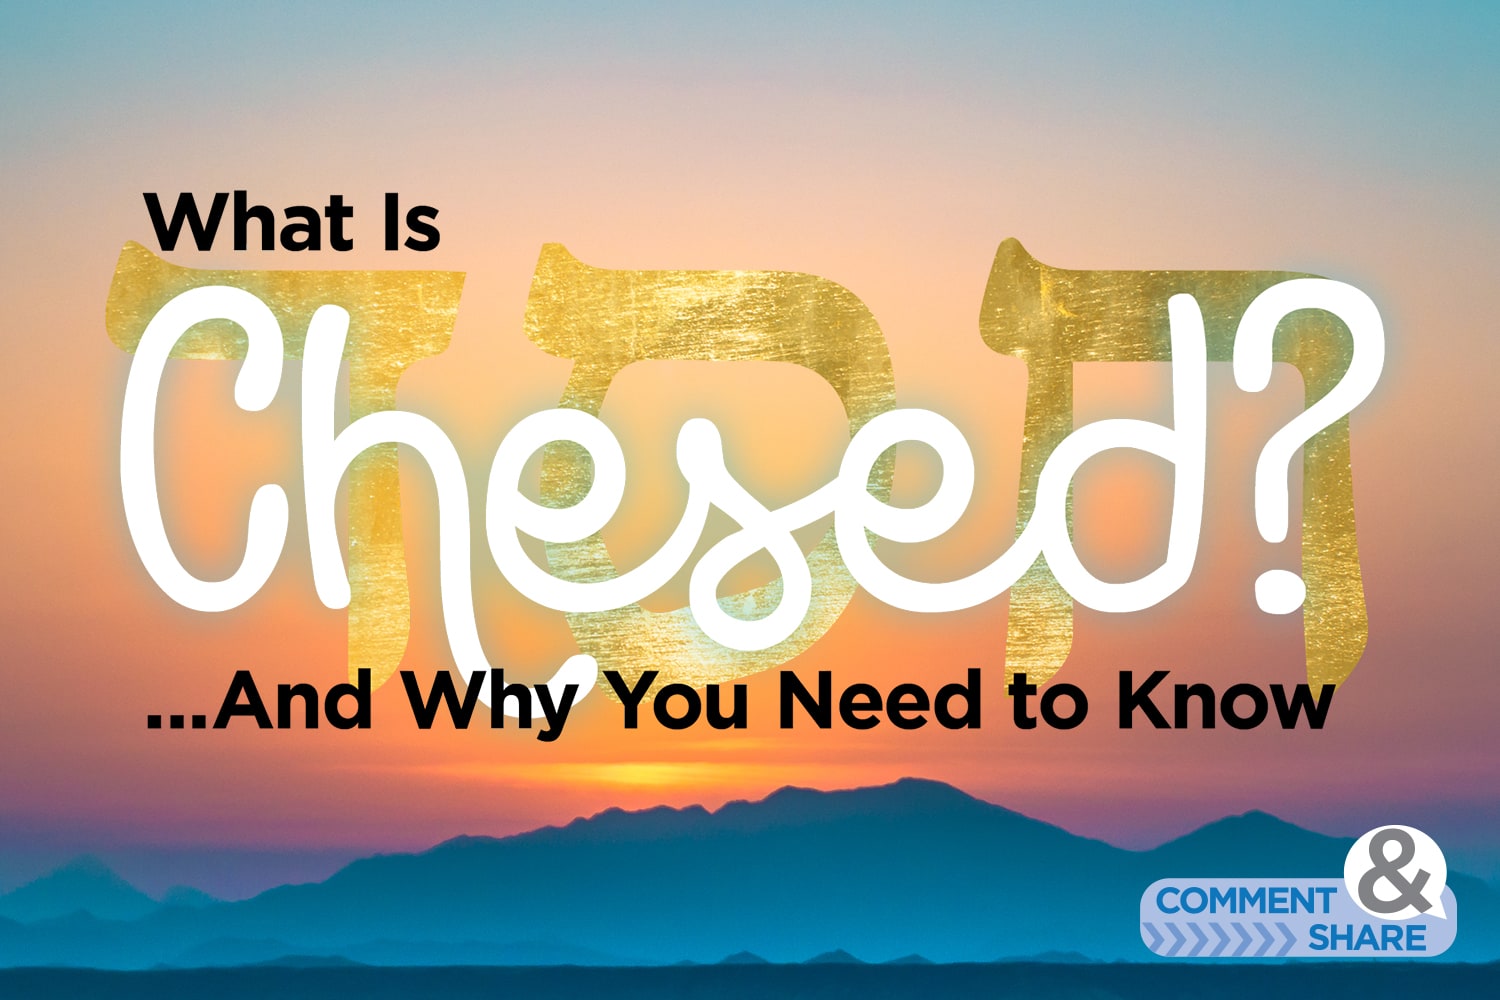 What Is Chesed?